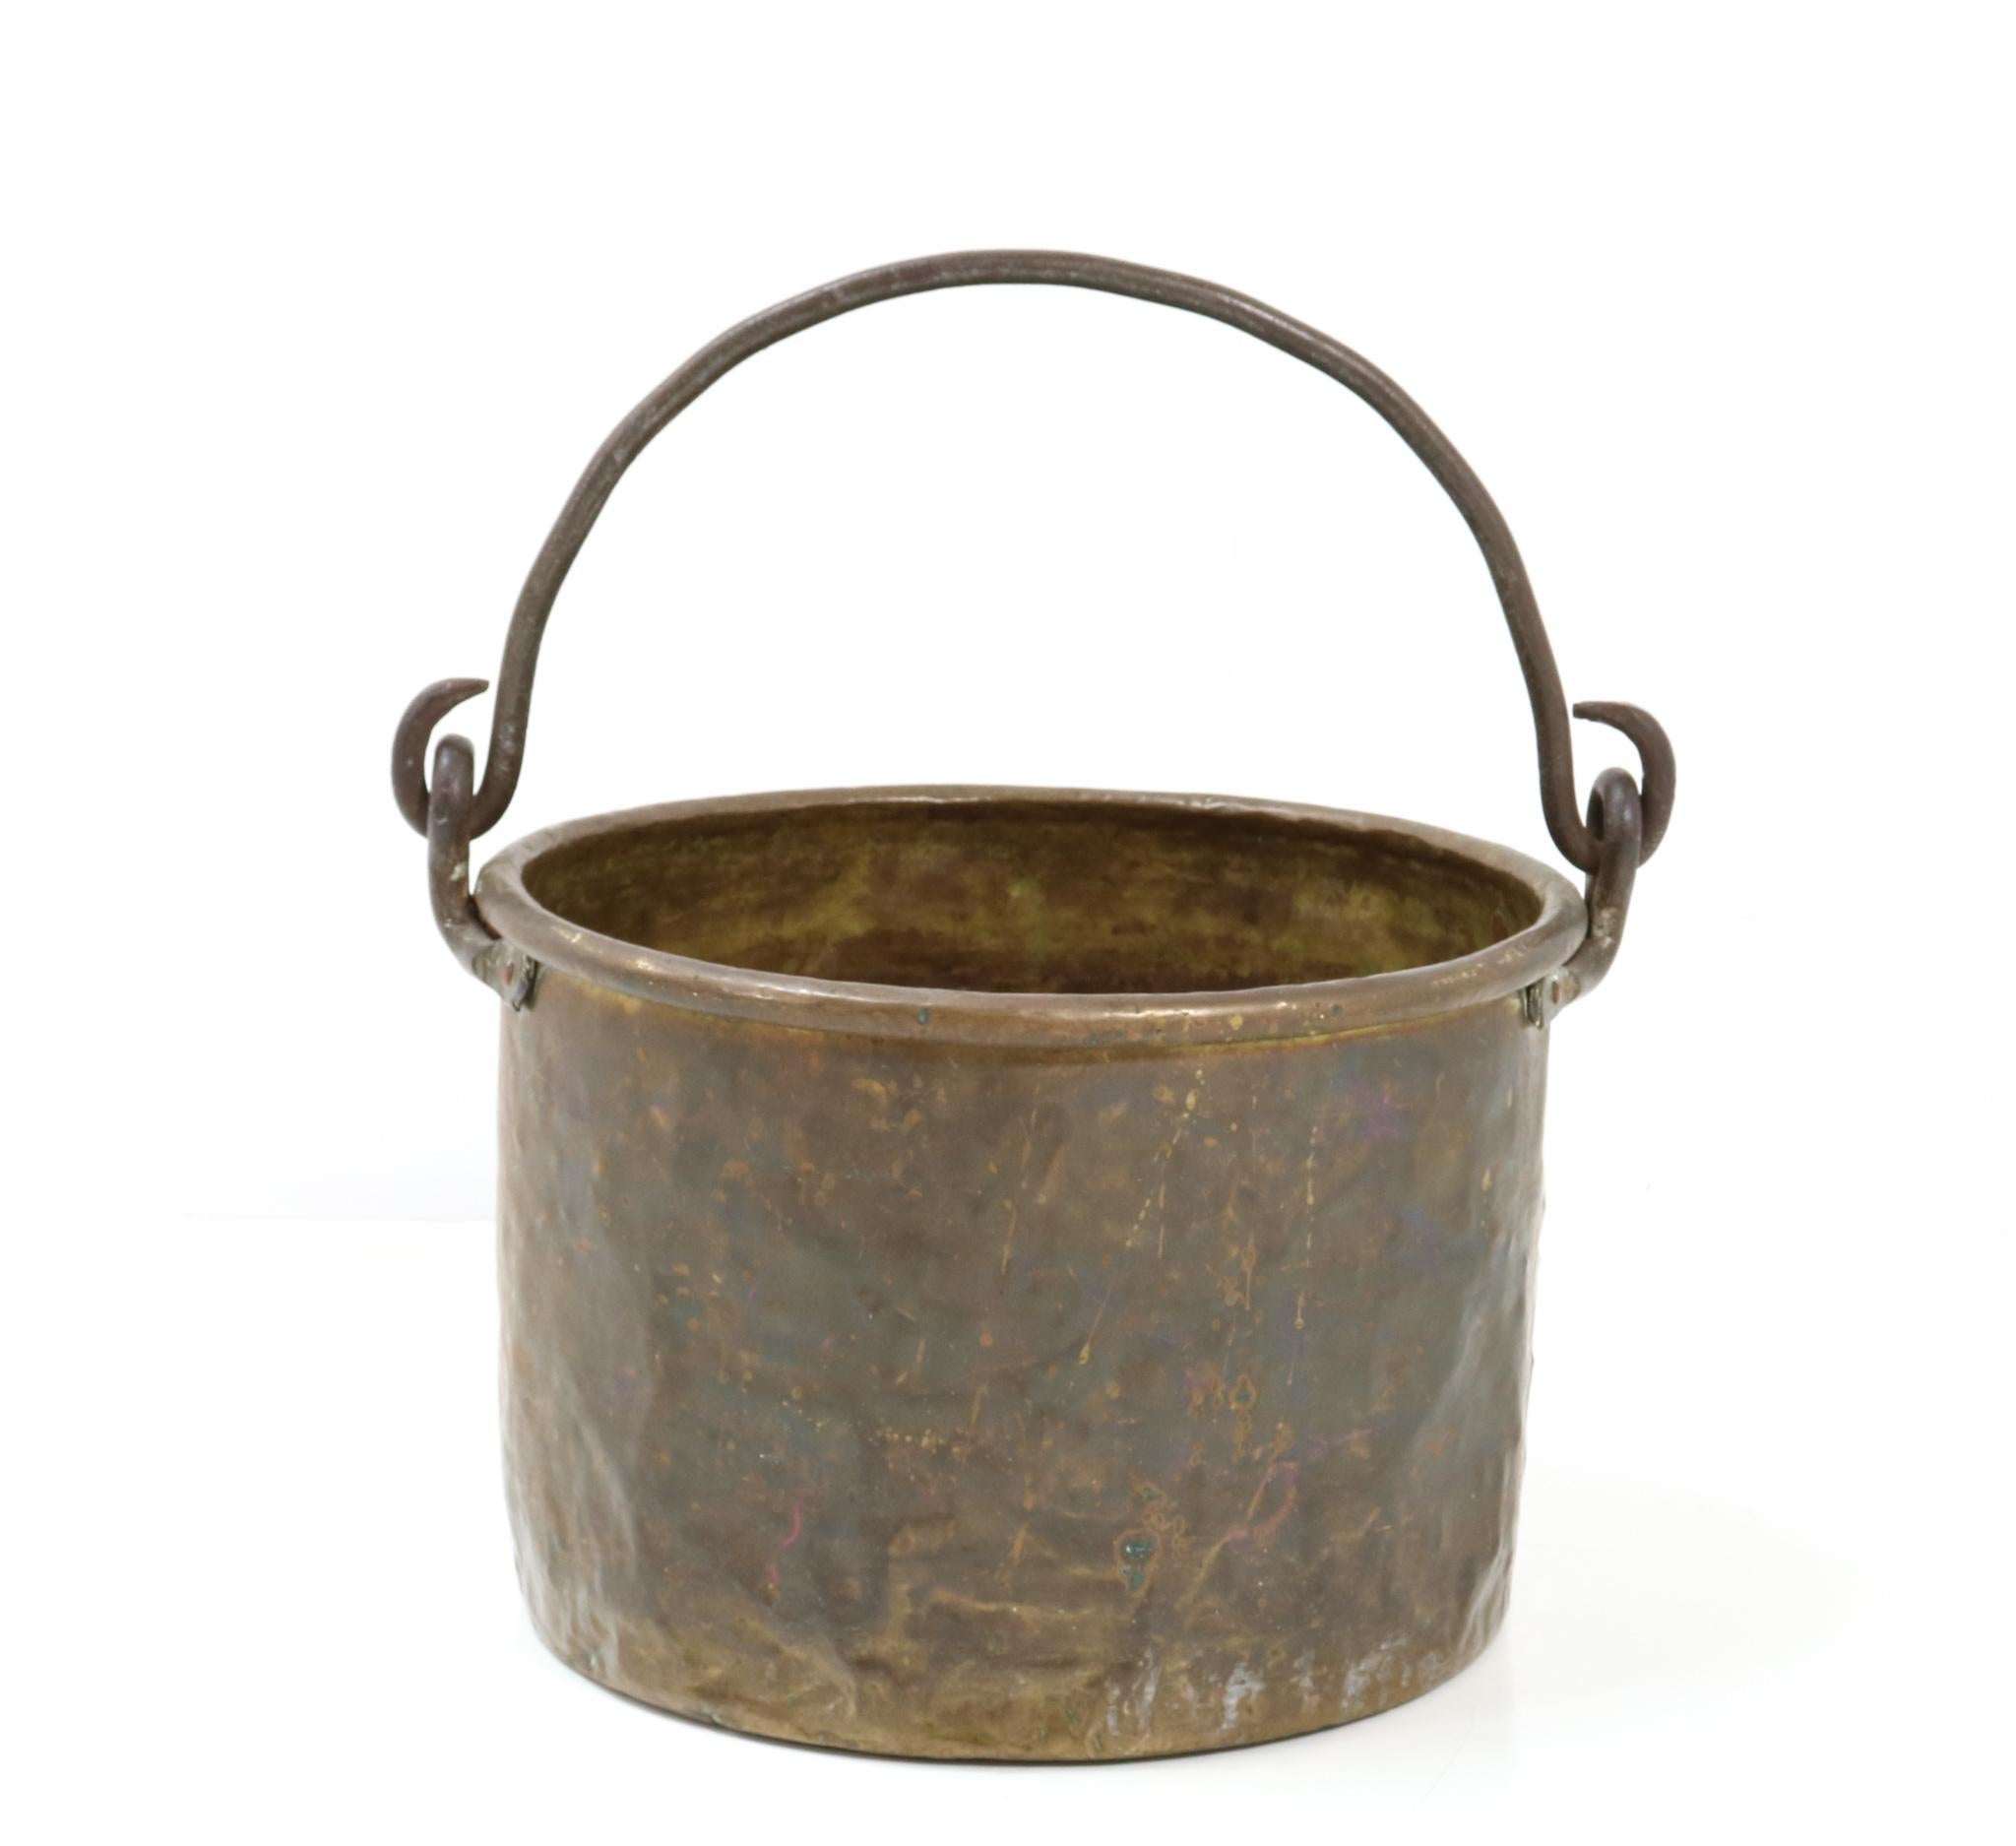 Stunning Antique log holder or firewood basket.
Striking Dutch design from the late 18th Century.
Solid patinated brass with the original wrought iron handle.
This wonderful Louis XV log holder or firewood basket is in very good
condition with